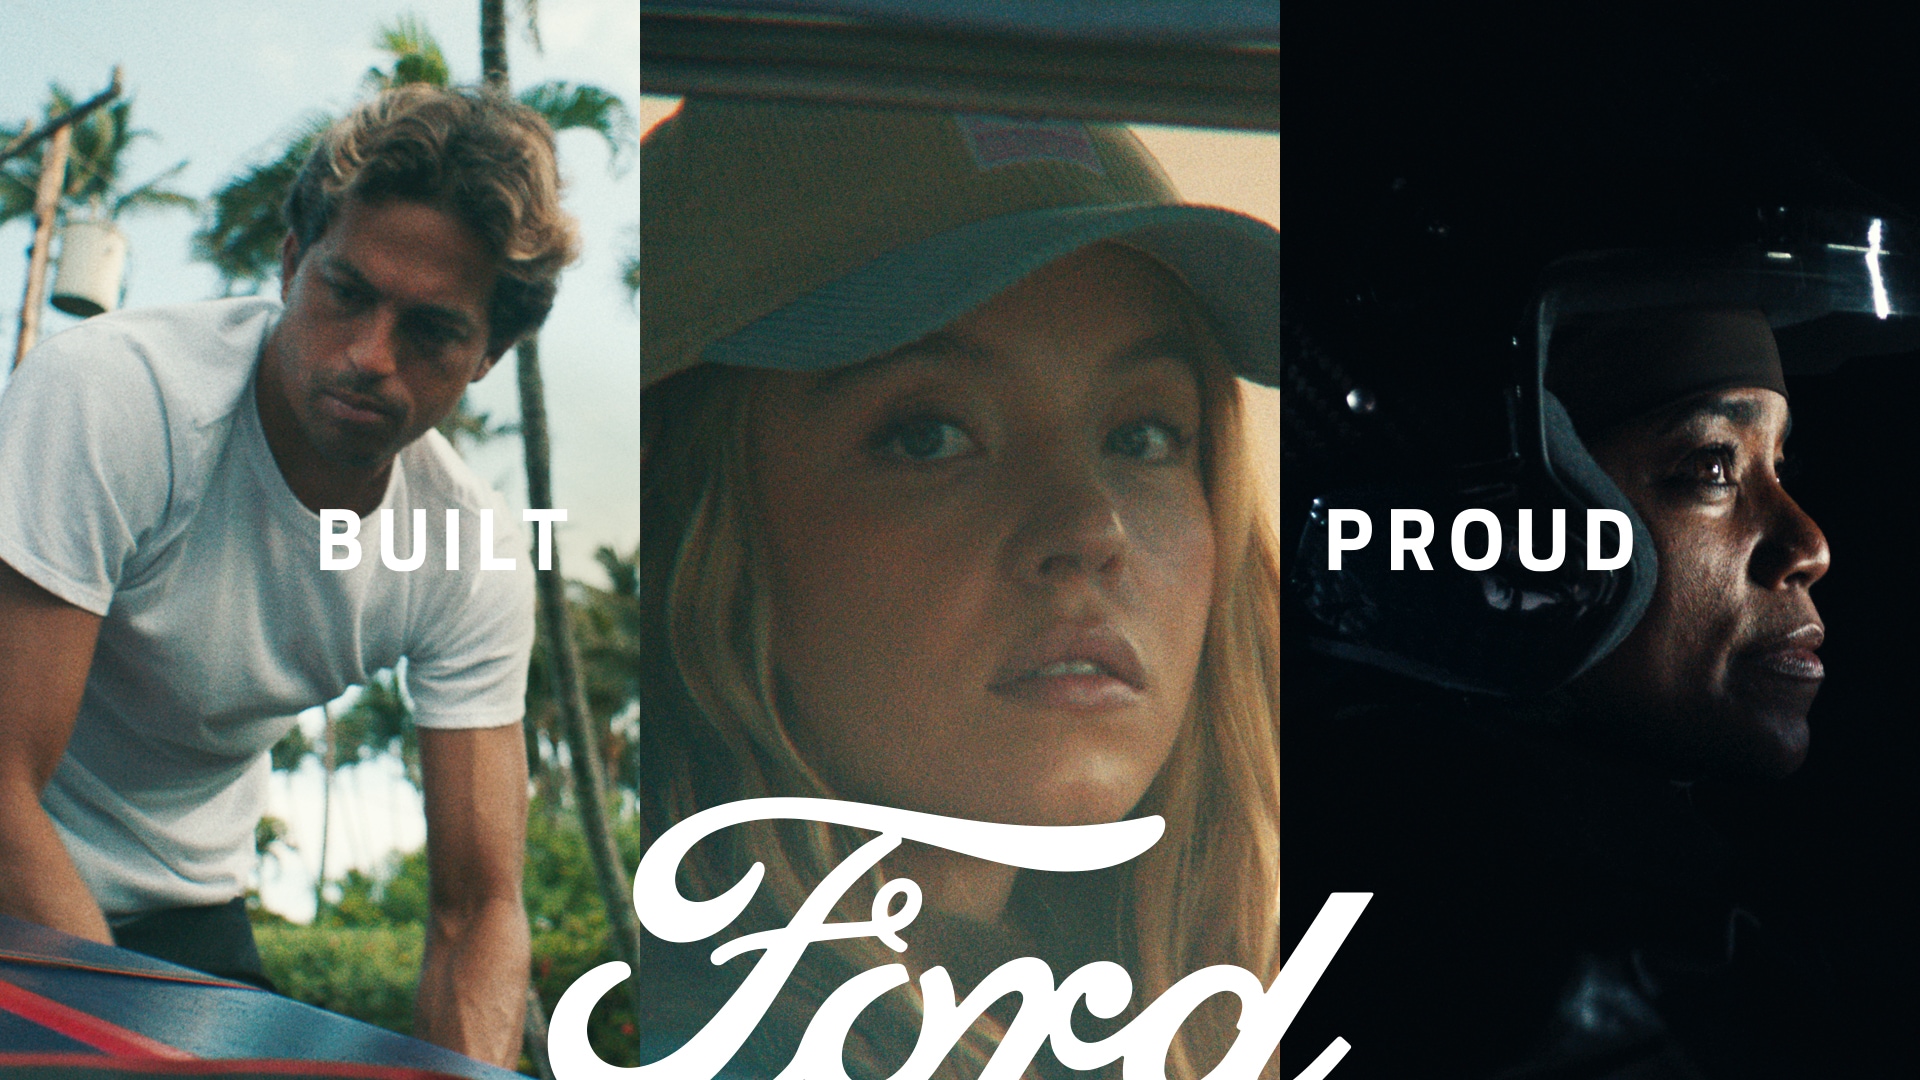 New Ford 'Built Ford Proud' Campaign Celebrates the Next